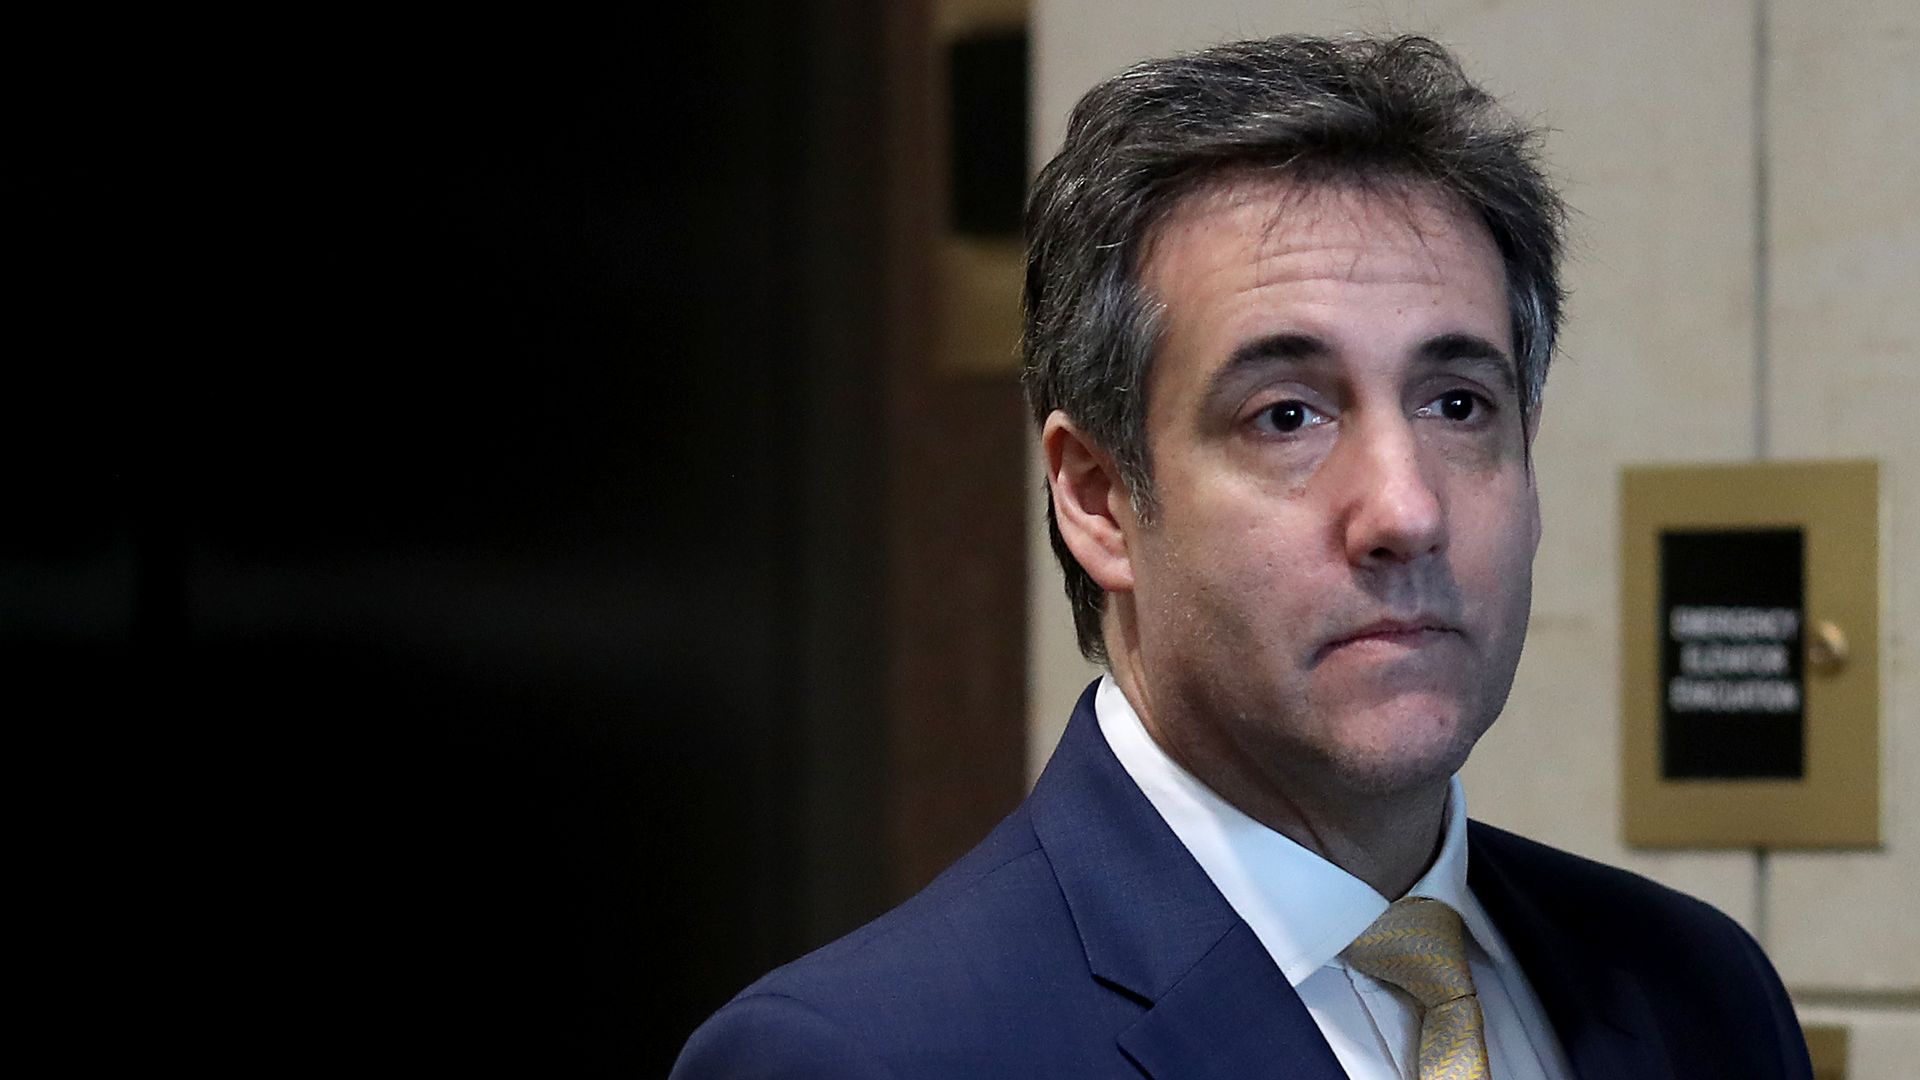 In this image, Michael Cohen stands next to an elevator. 